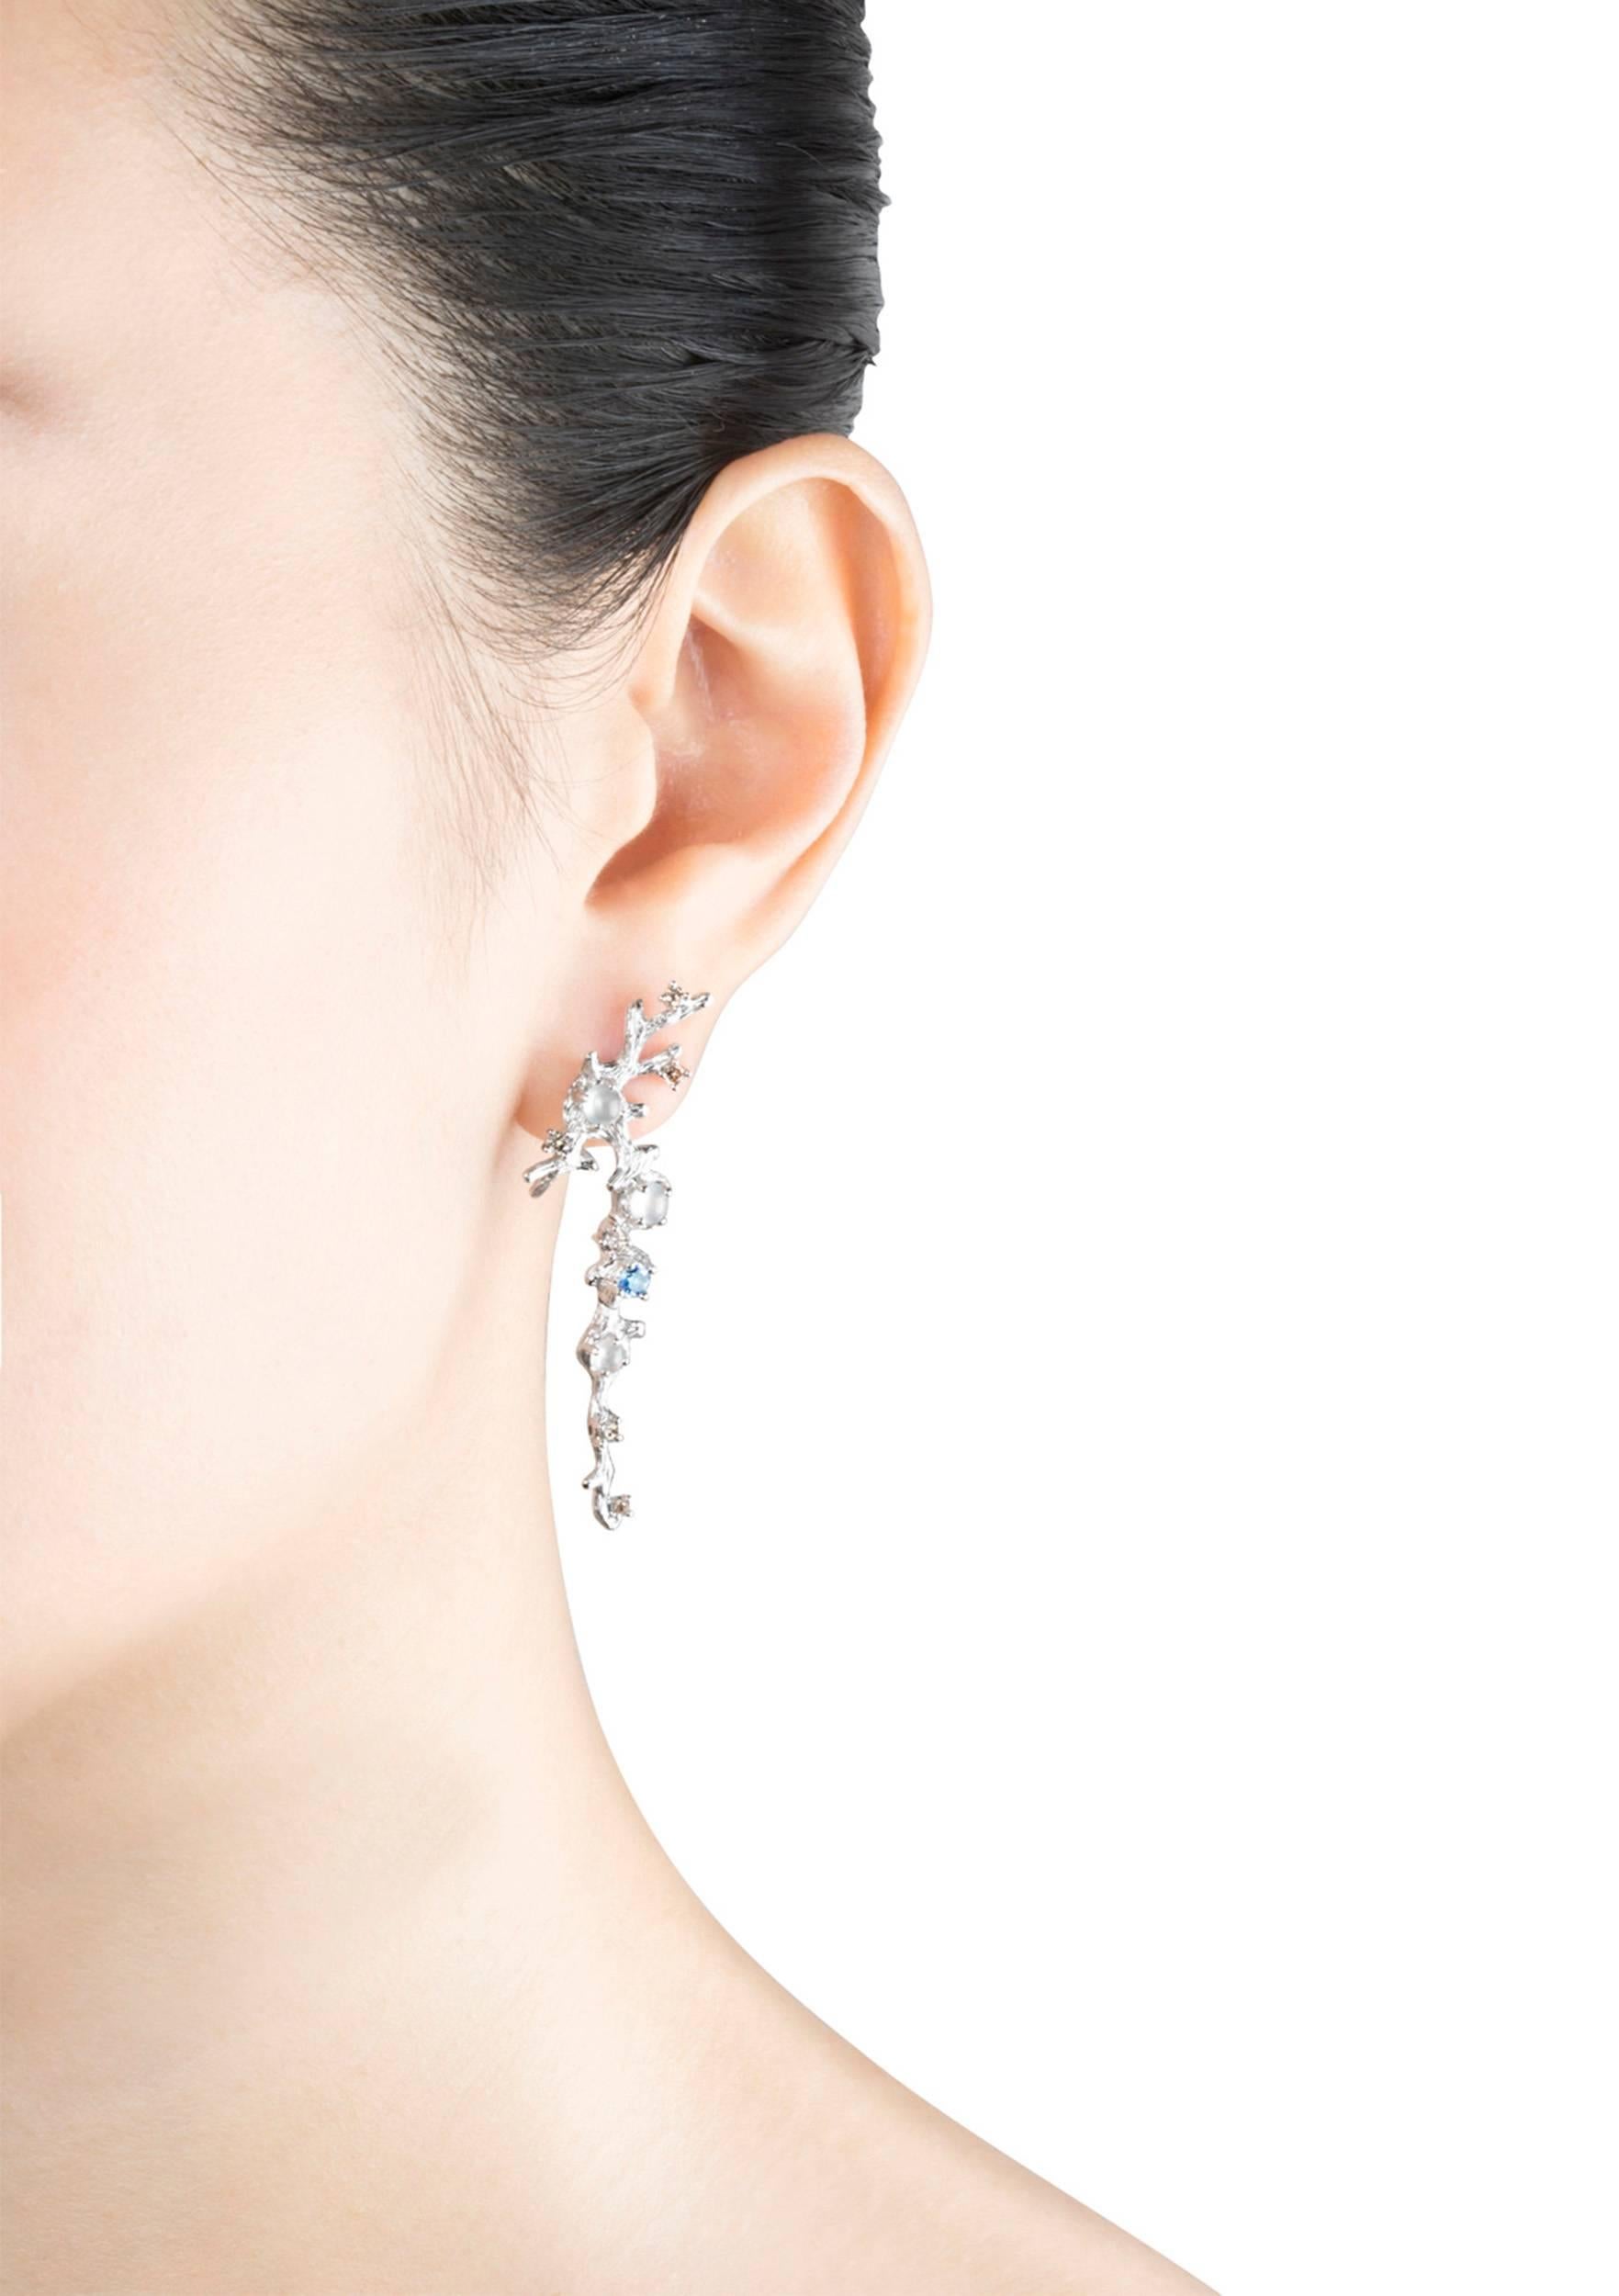 The distinctive finish of these 18K white gold earrings is inspired by glistening dewdrops at dawn. Featuring icy jade, fancy diamonds and sapphires, their simple yet stunning structure sparkles beautifully, embracing the excitement of a new day,